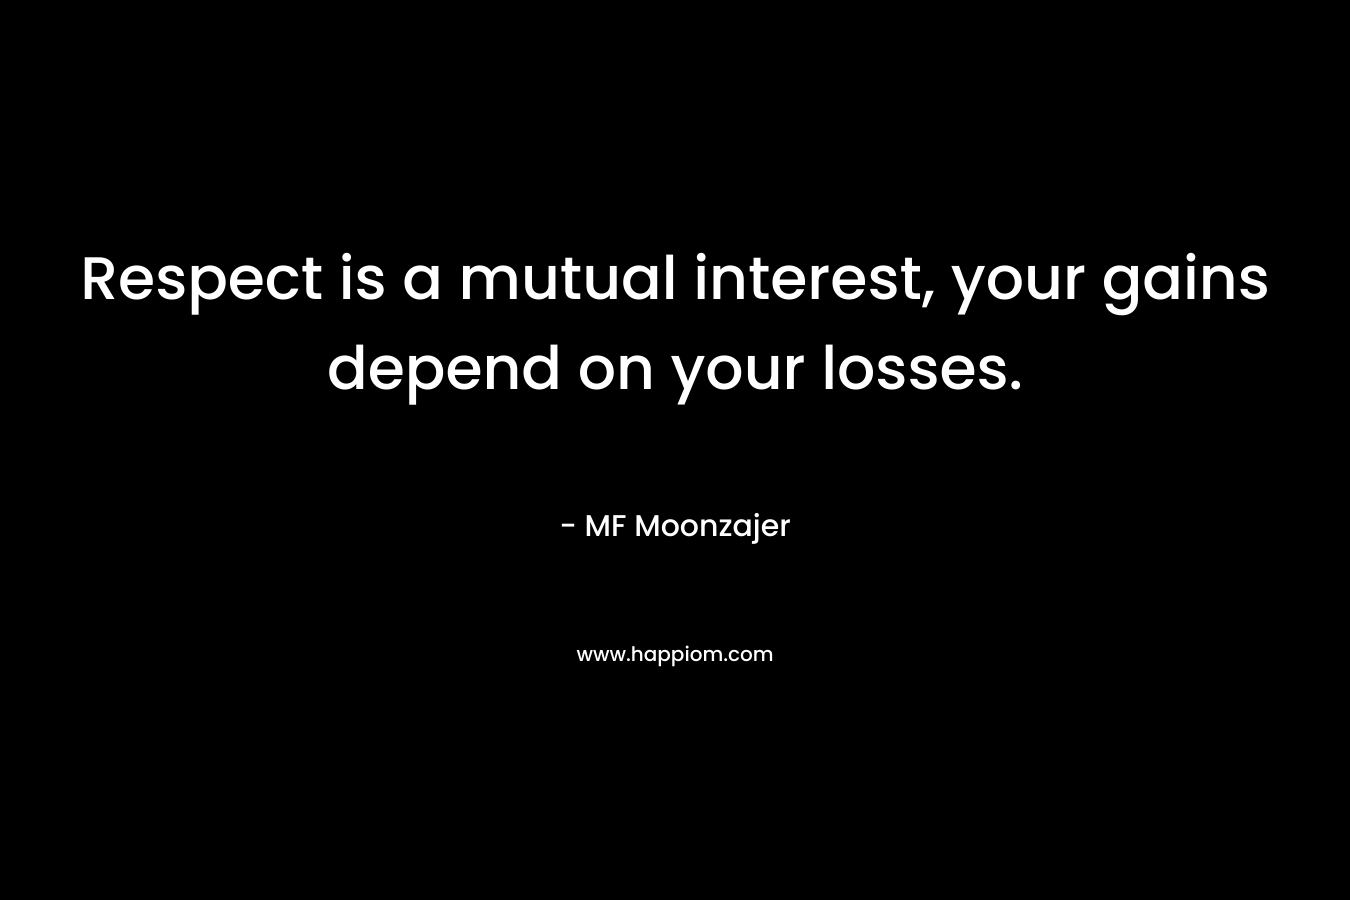 Respect is a mutual interest, your gains depend on your losses. – MF Moonzajer